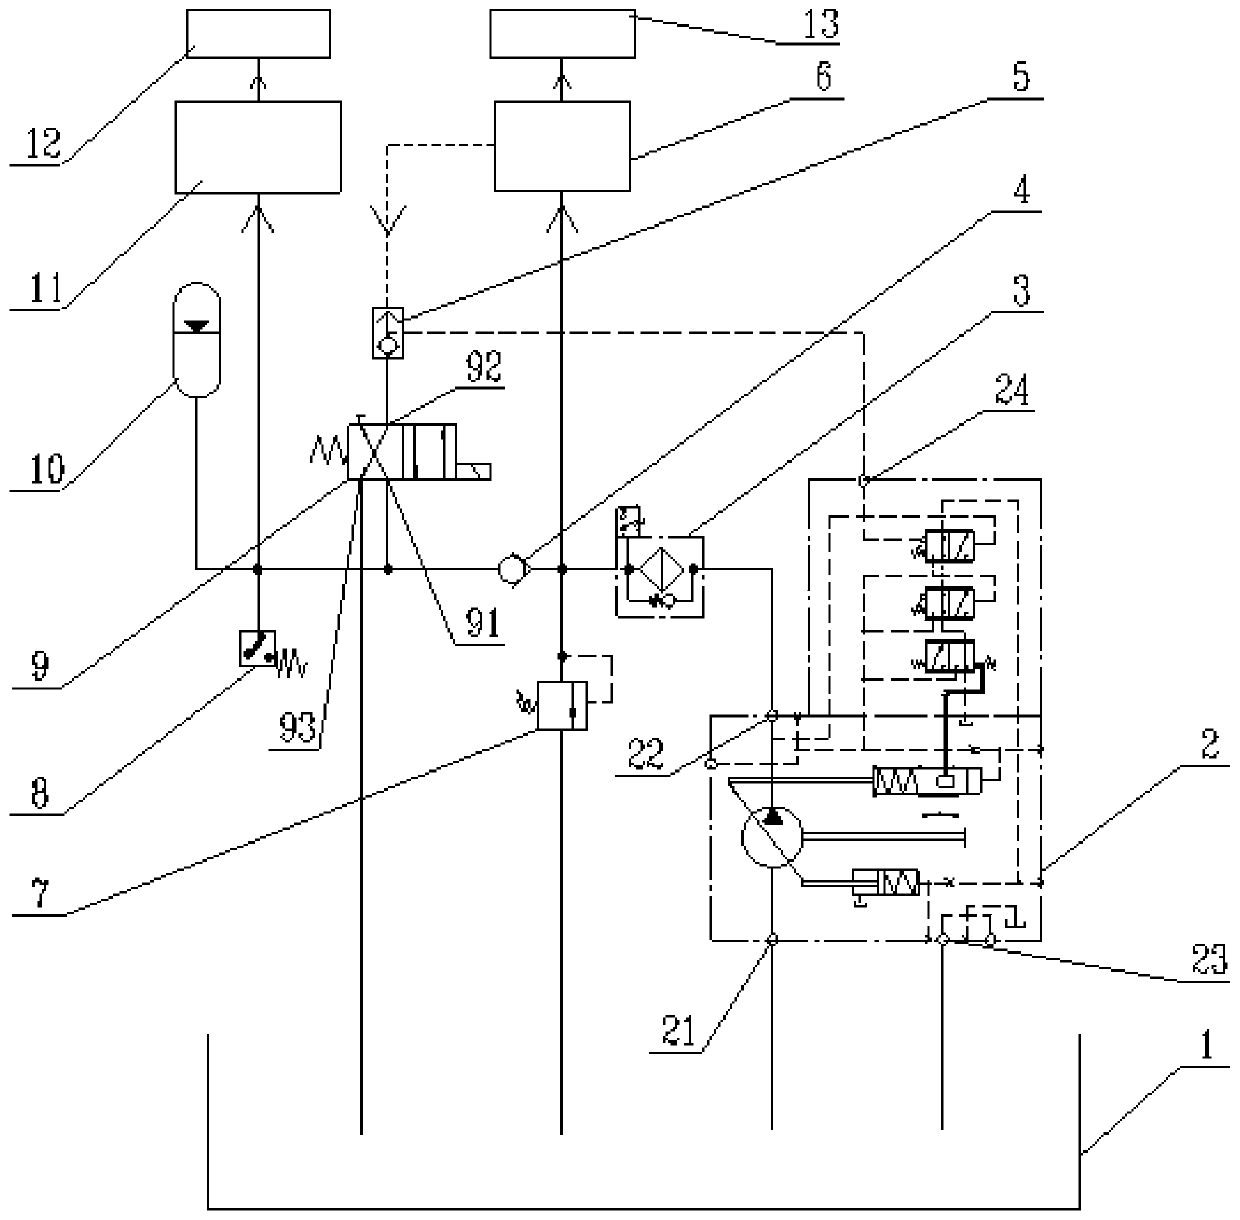 An open variable pump system integrating constant pressure function and load sensing function